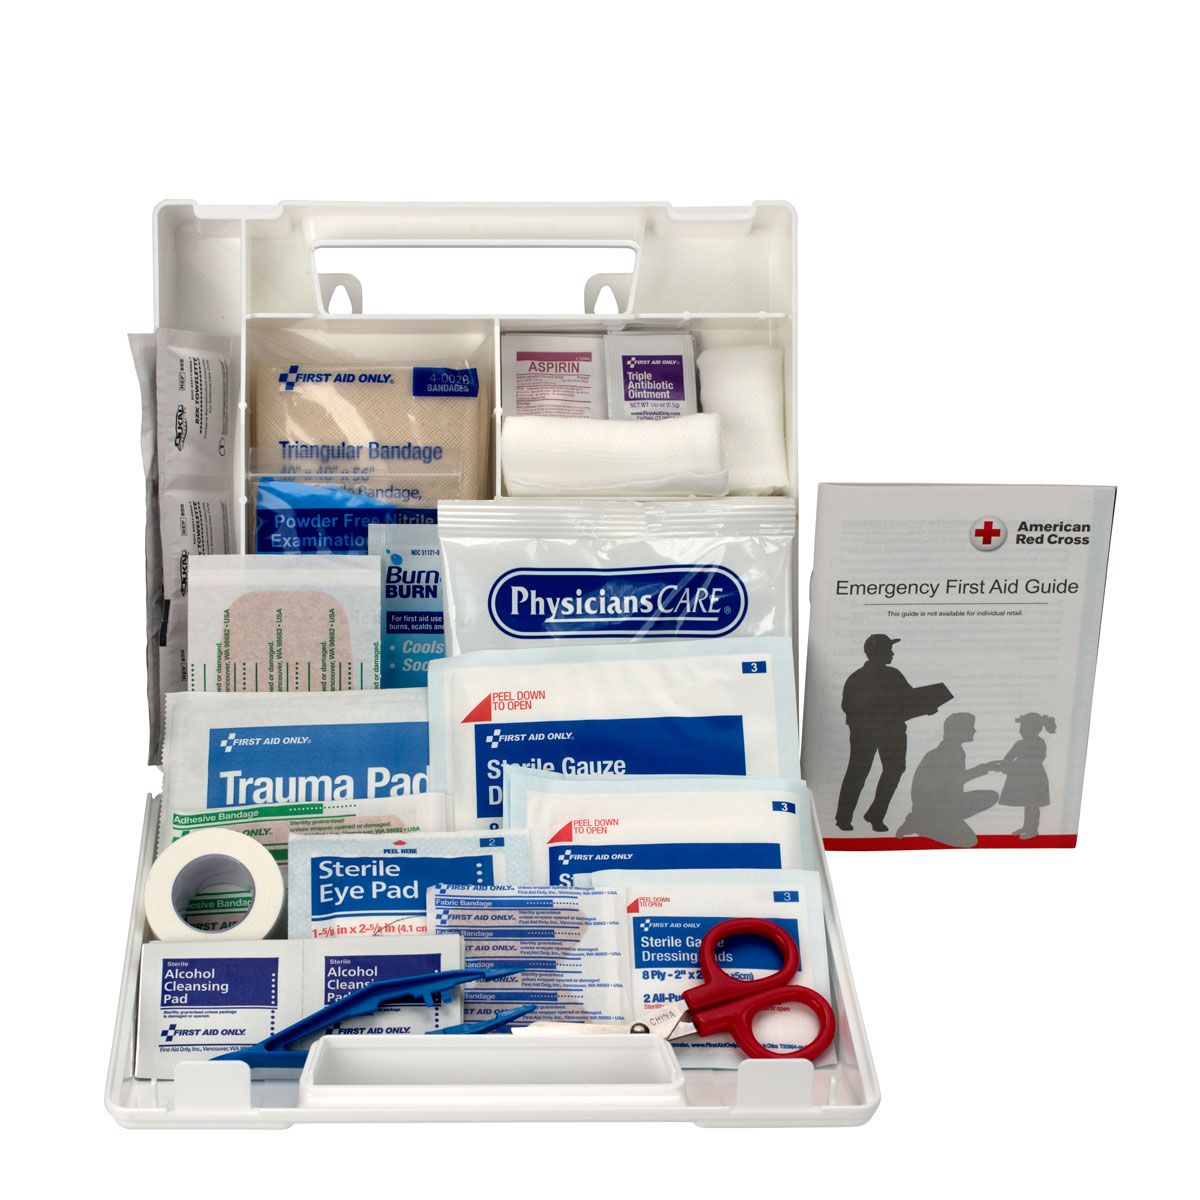 10 Person First Aid Kit, Plastic Case With Dividers - W-222-U